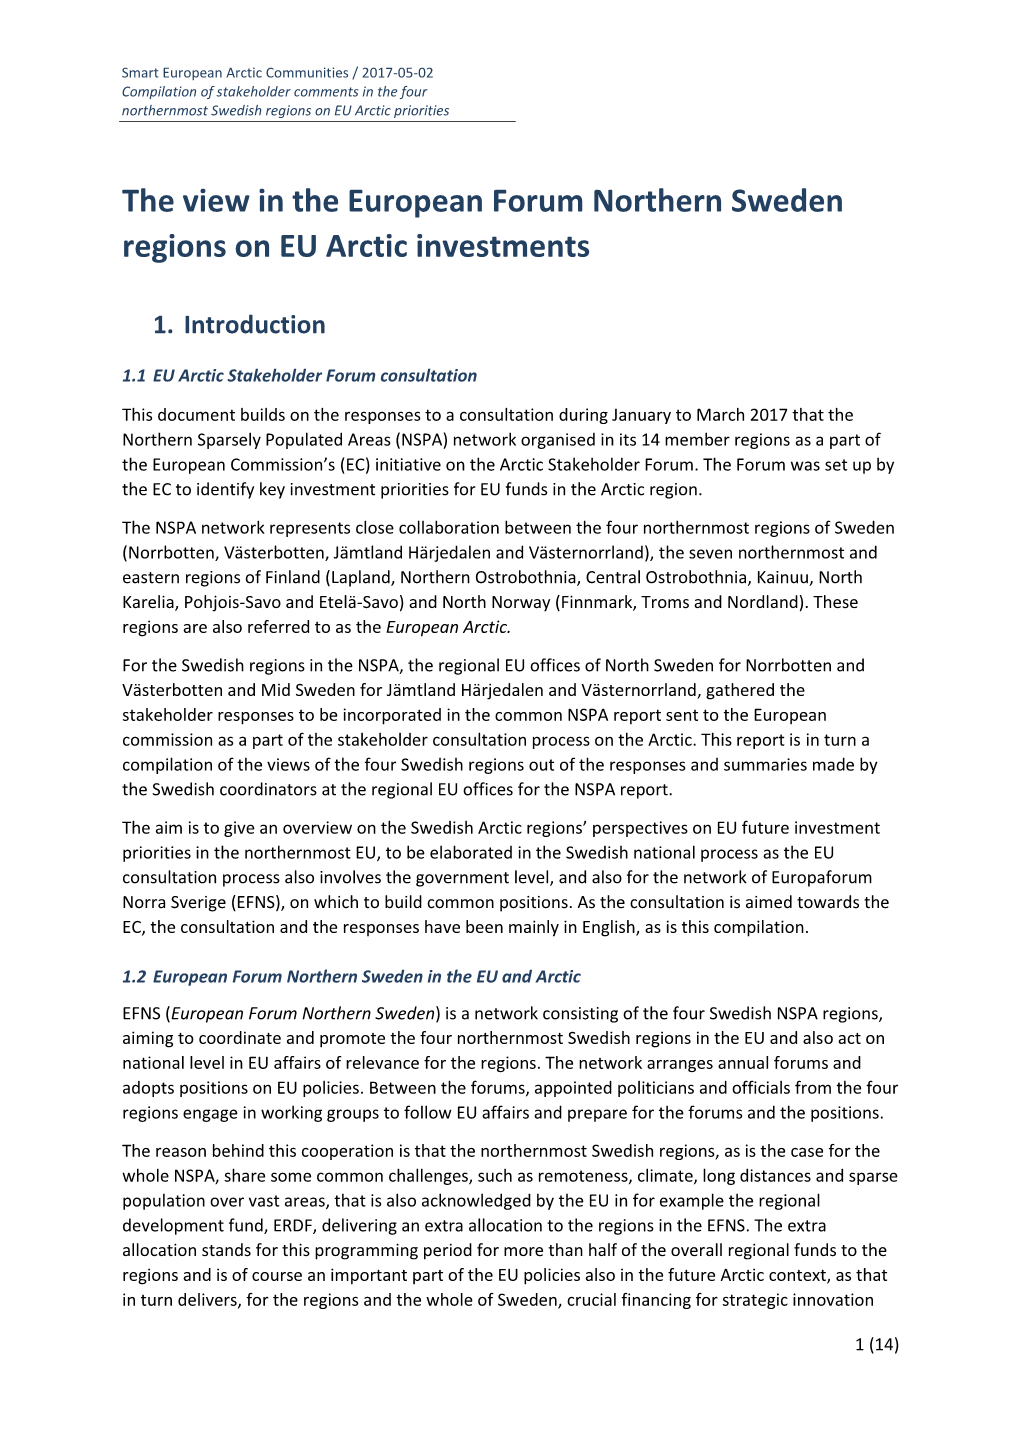 The View in the European Forum Northern Sweden Regions on EU Arctic Investments